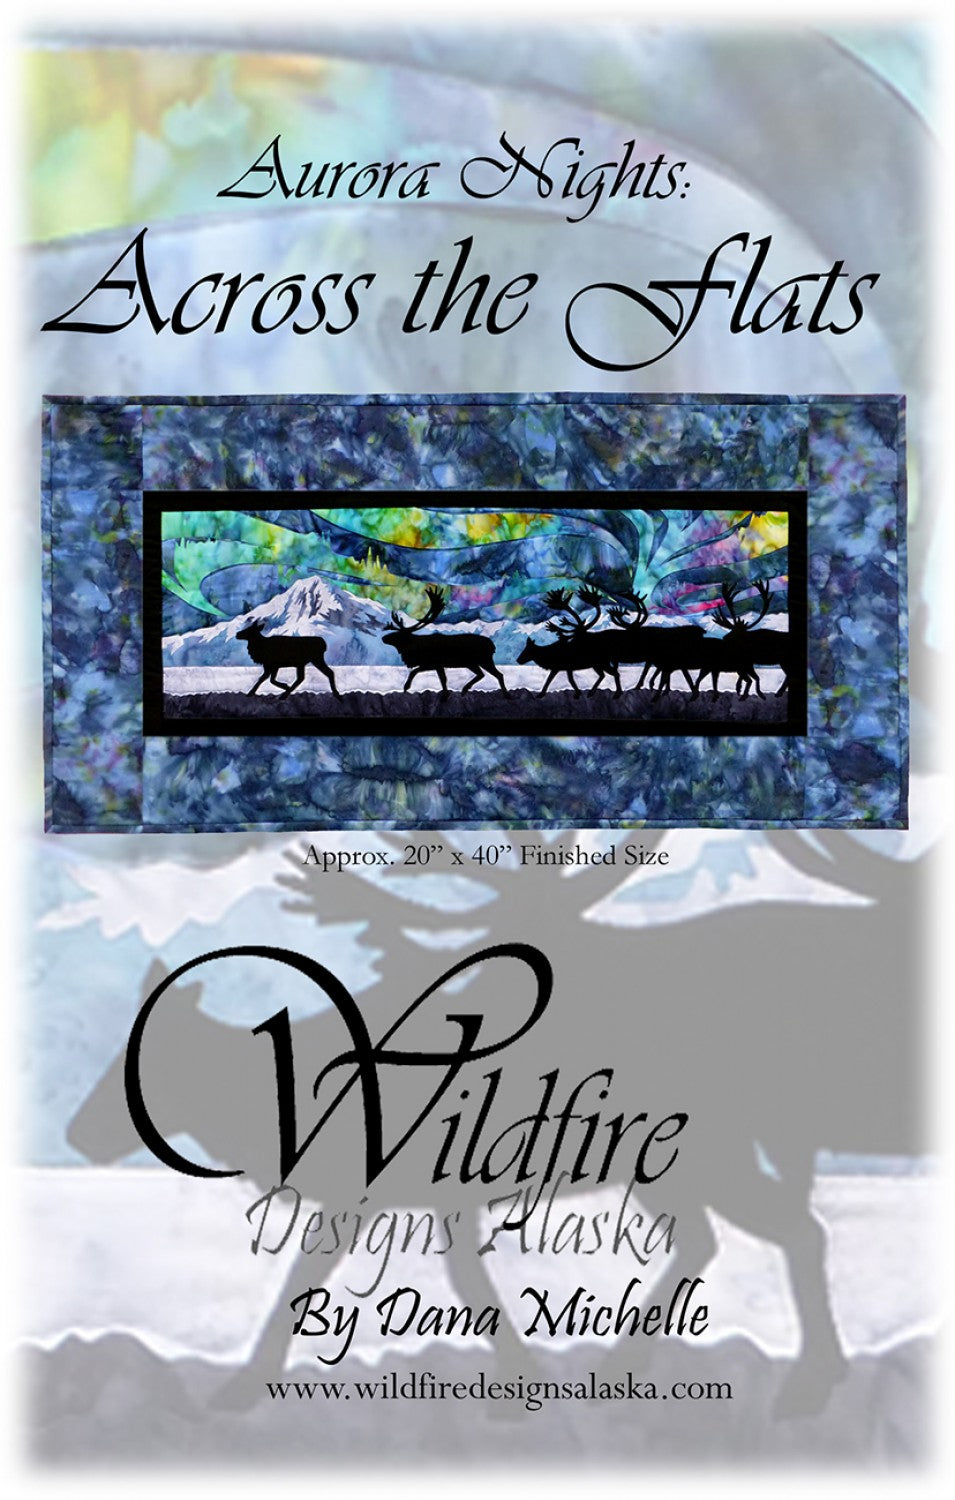 Wildfire Designs Alaska Aurora Nights Across the Flats Applique Quilt Pattern Front Cover